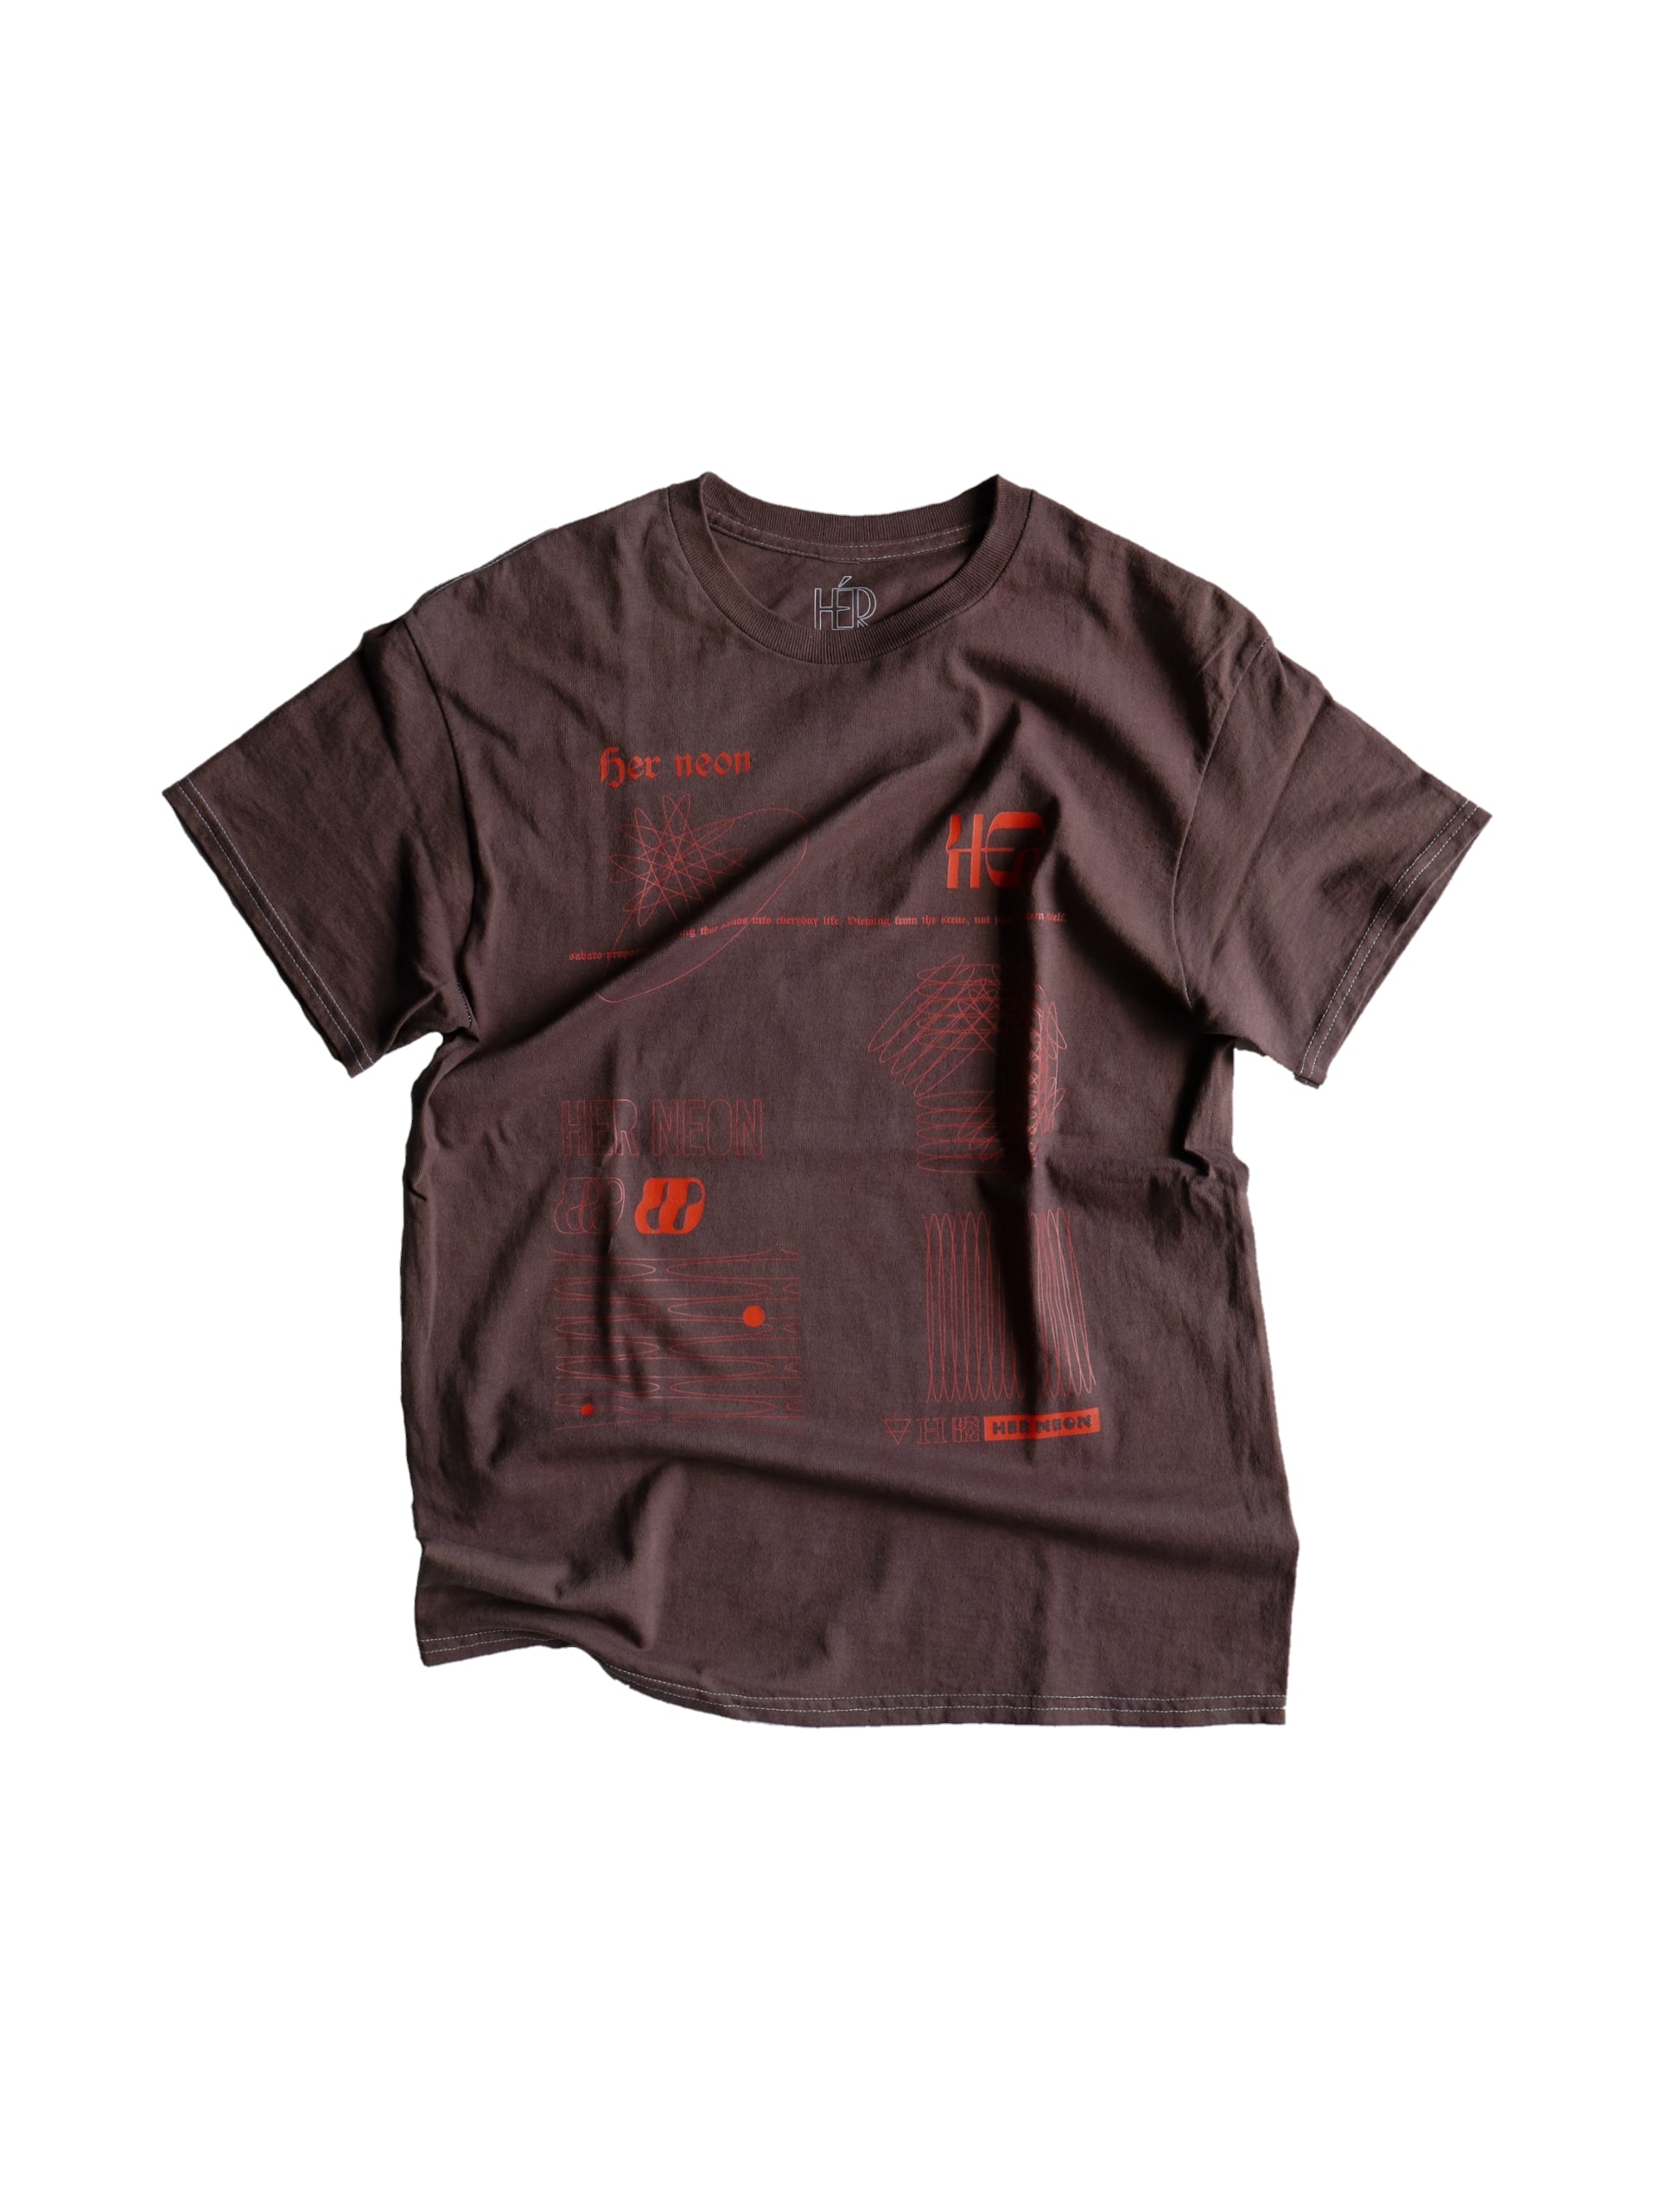 herneon tシャツ Reactive dye tee / Hole - Tシャツ/カットソー(半袖 